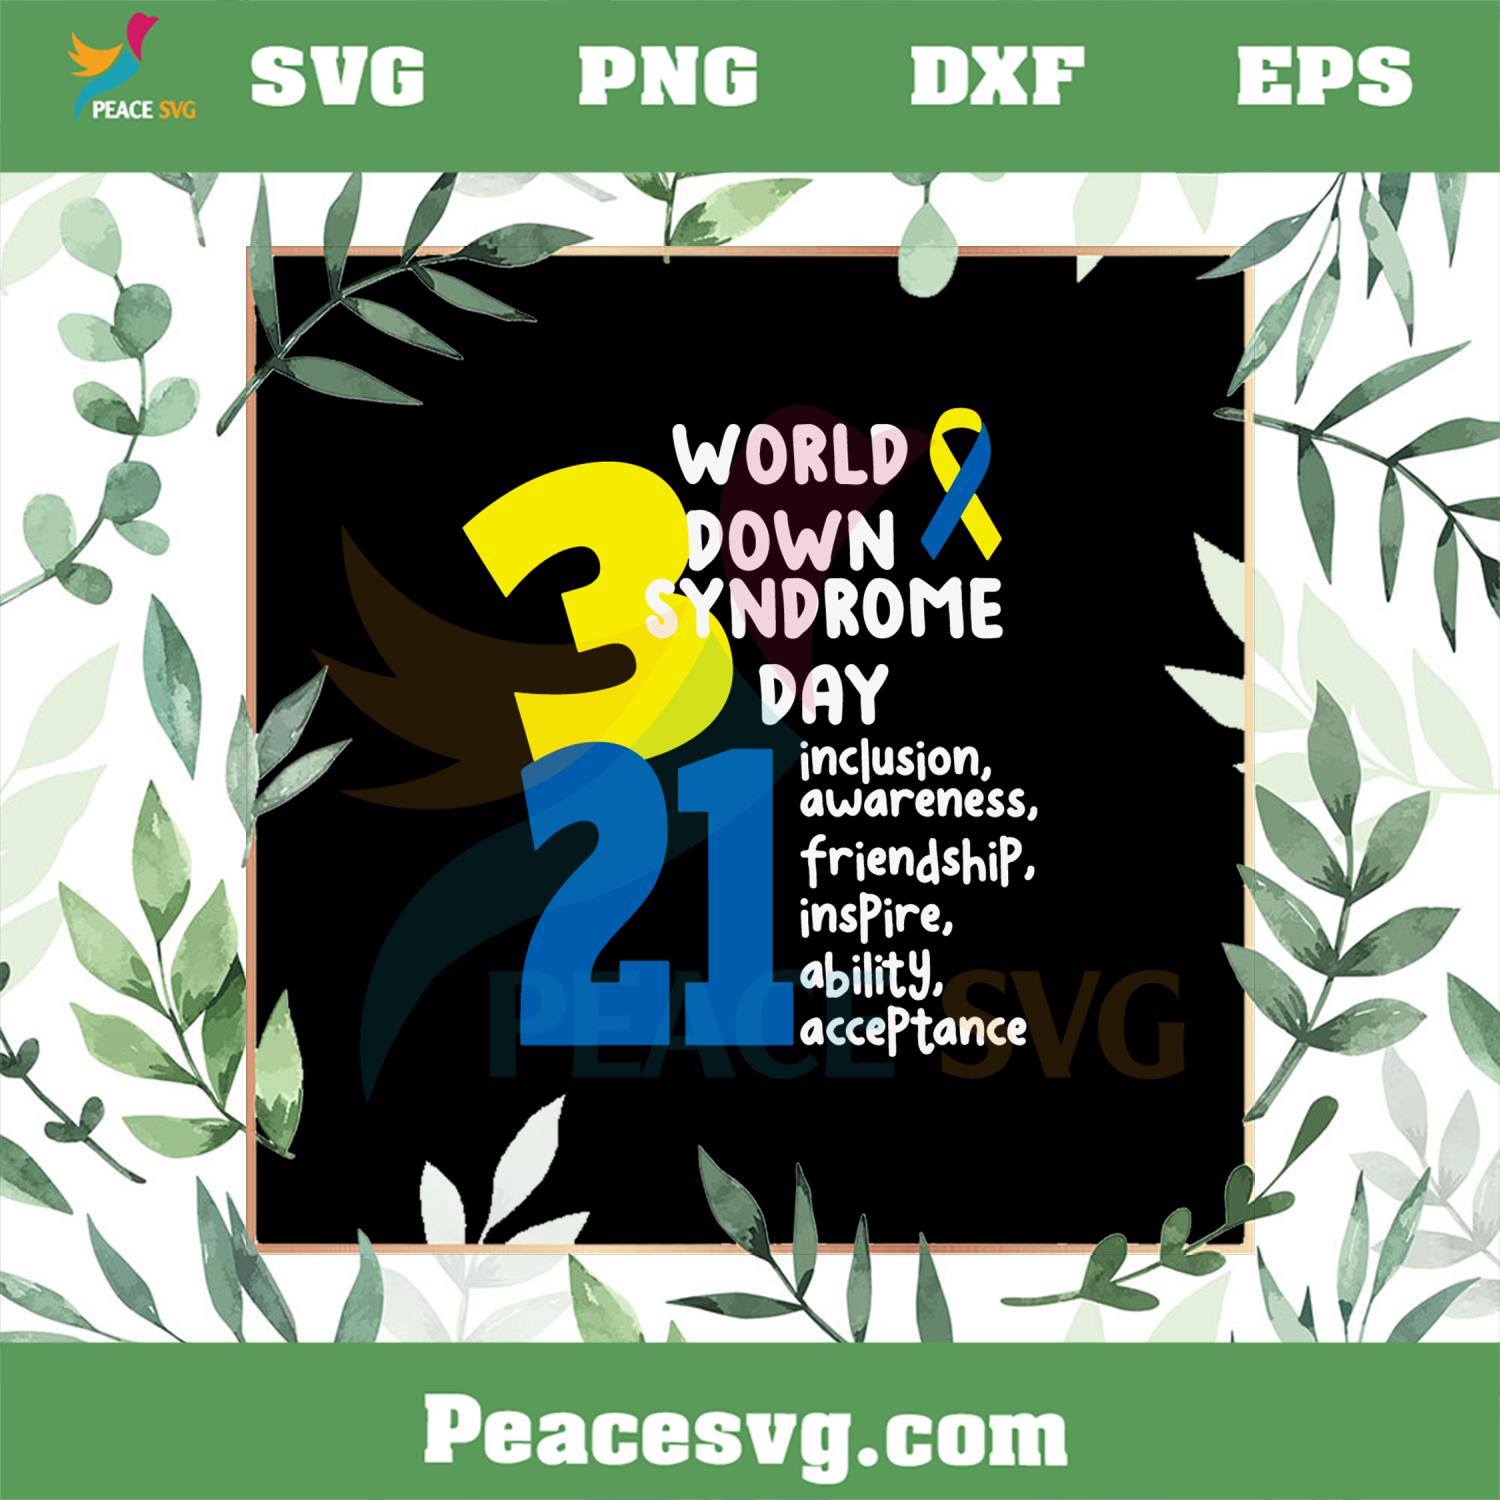 World Down Syndrome Day Awareness 3 21 Ribbon Svg Cutting Files